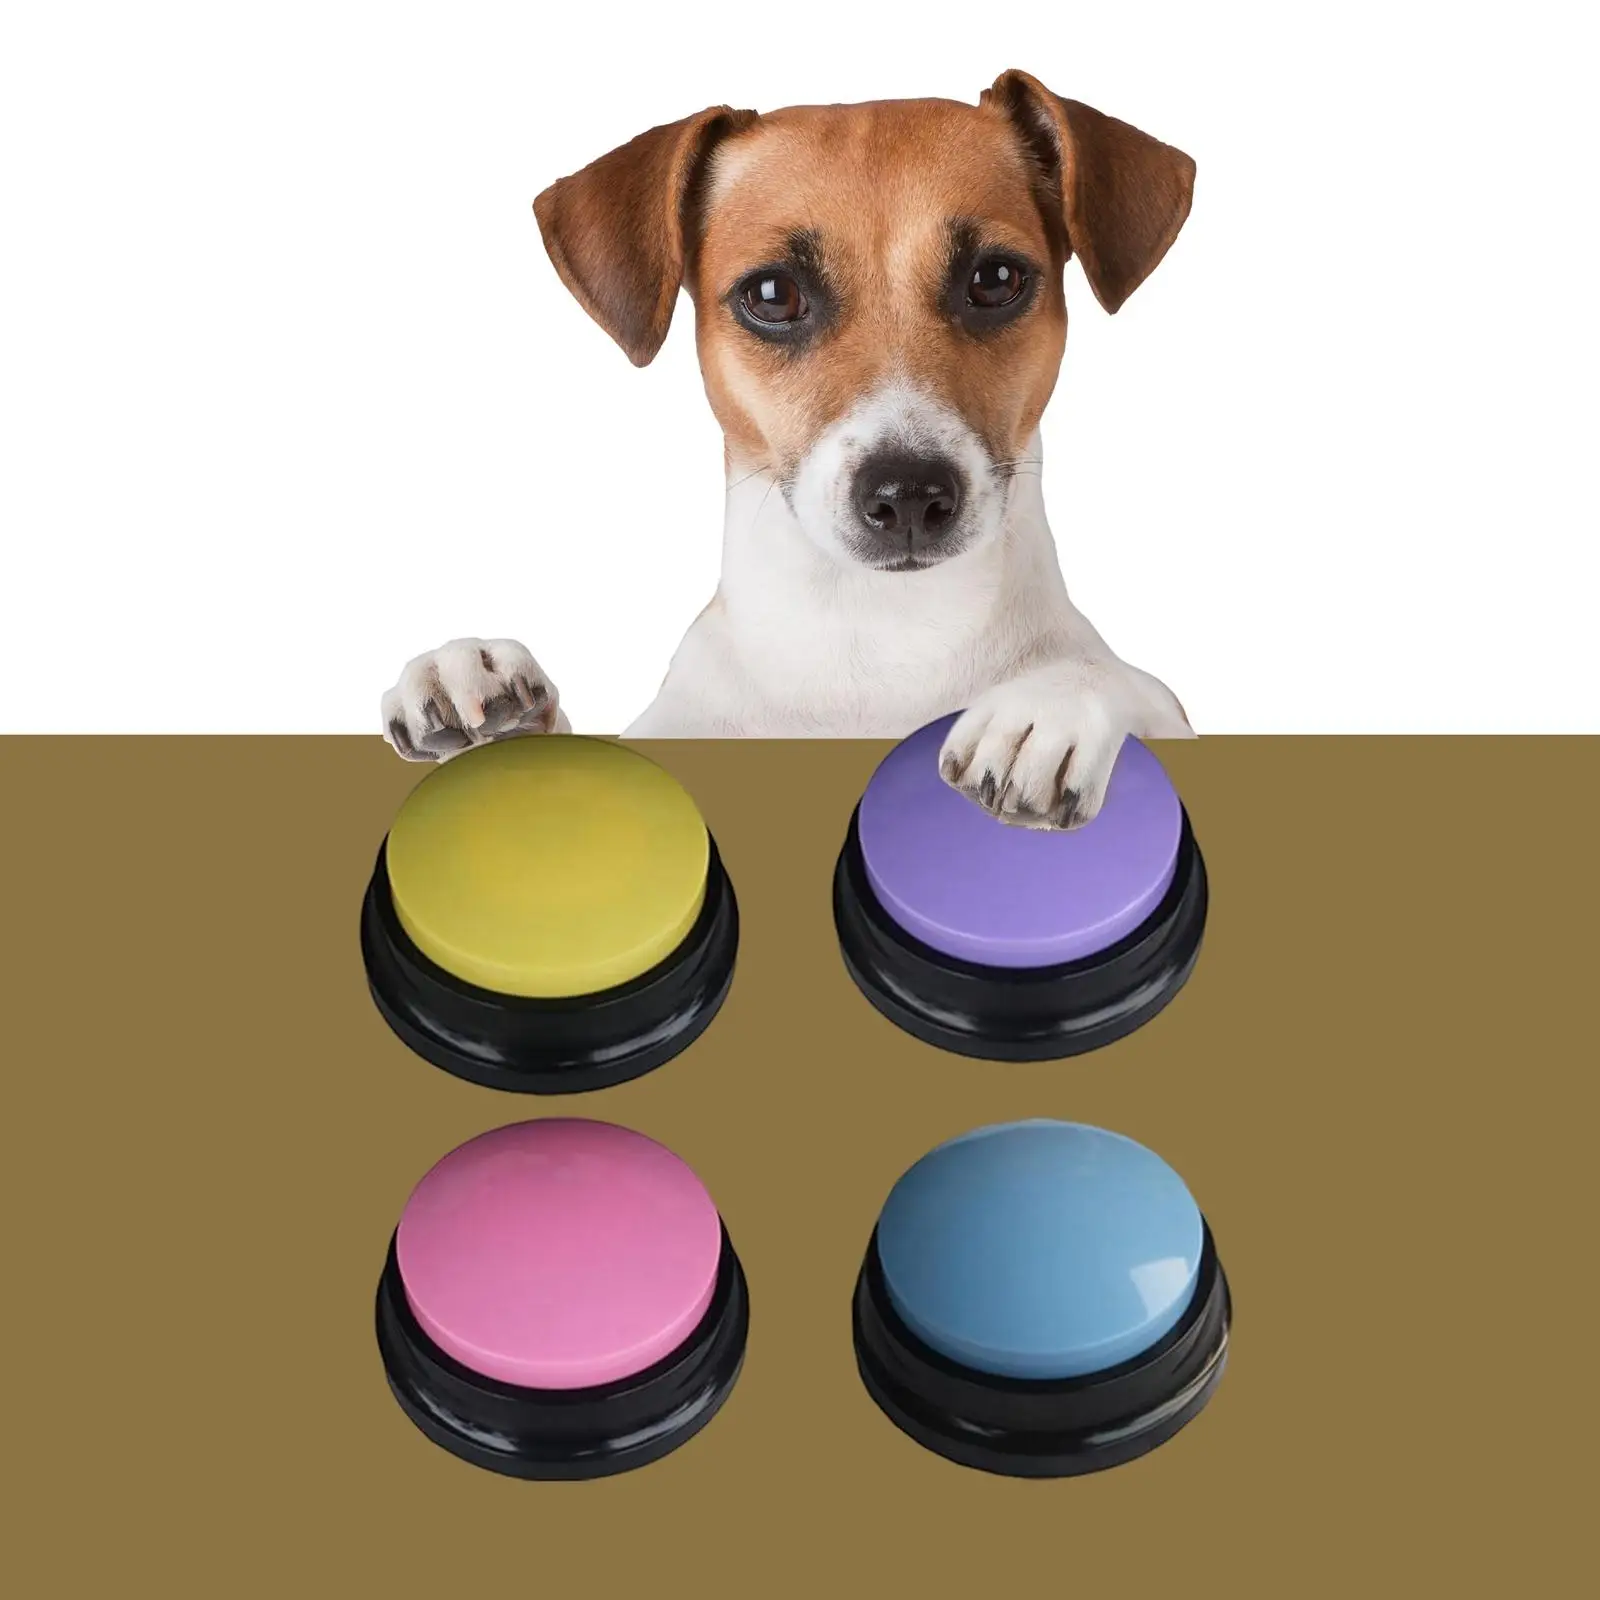 4x Recordable Talking Button Dog Interactive Toy Talking Recording Sound Button for Kids Child  Pet Training